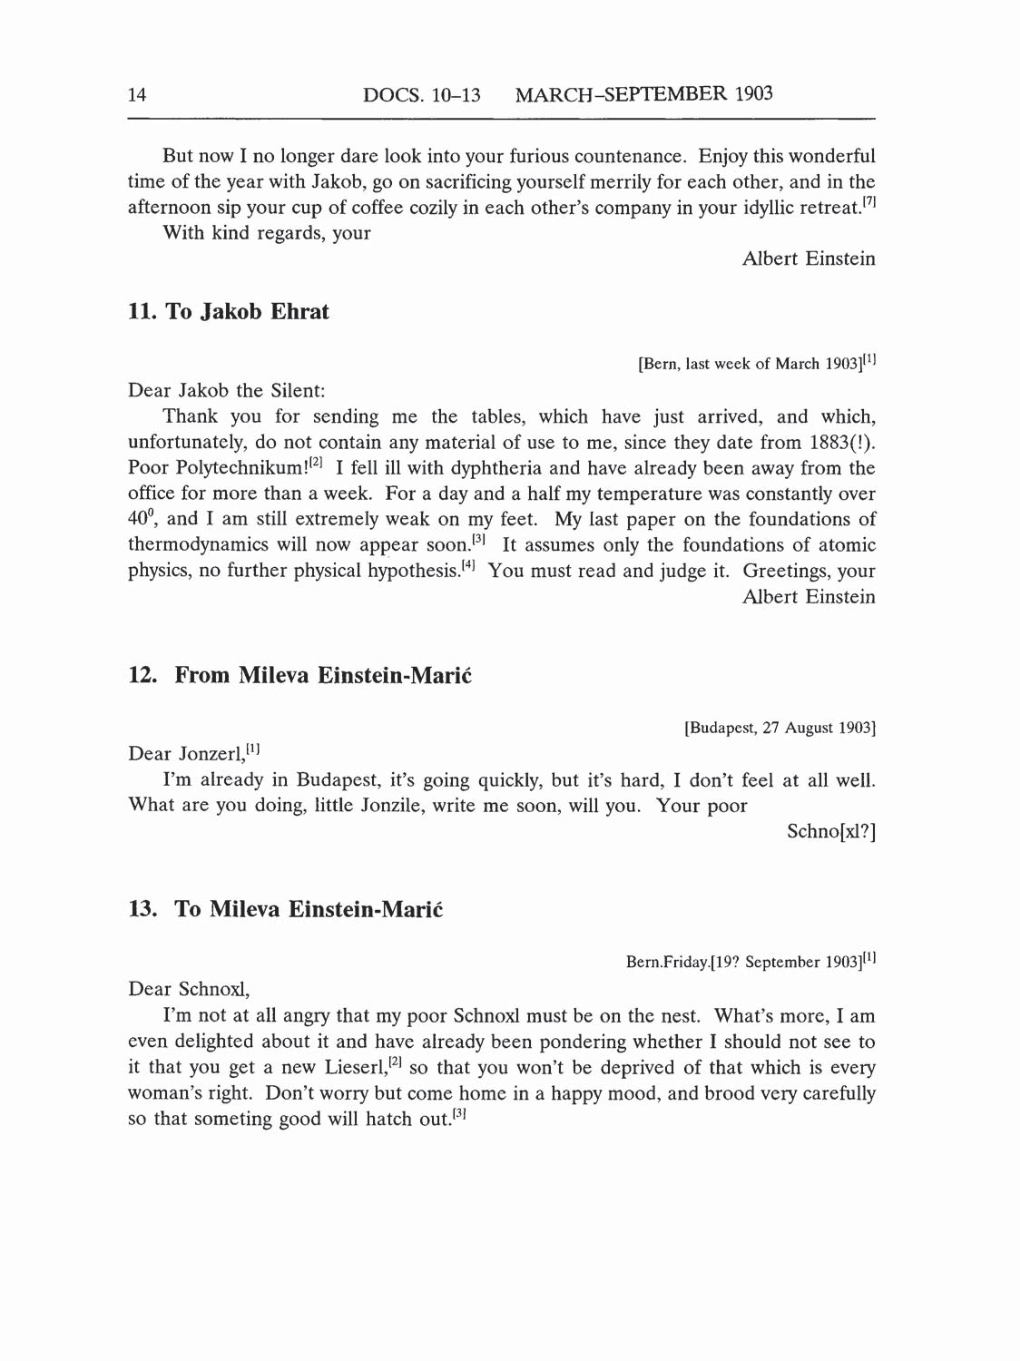 Volume 5: The Swiss Years: Correspondence, 1902-1914 (English translation supplement) page 14